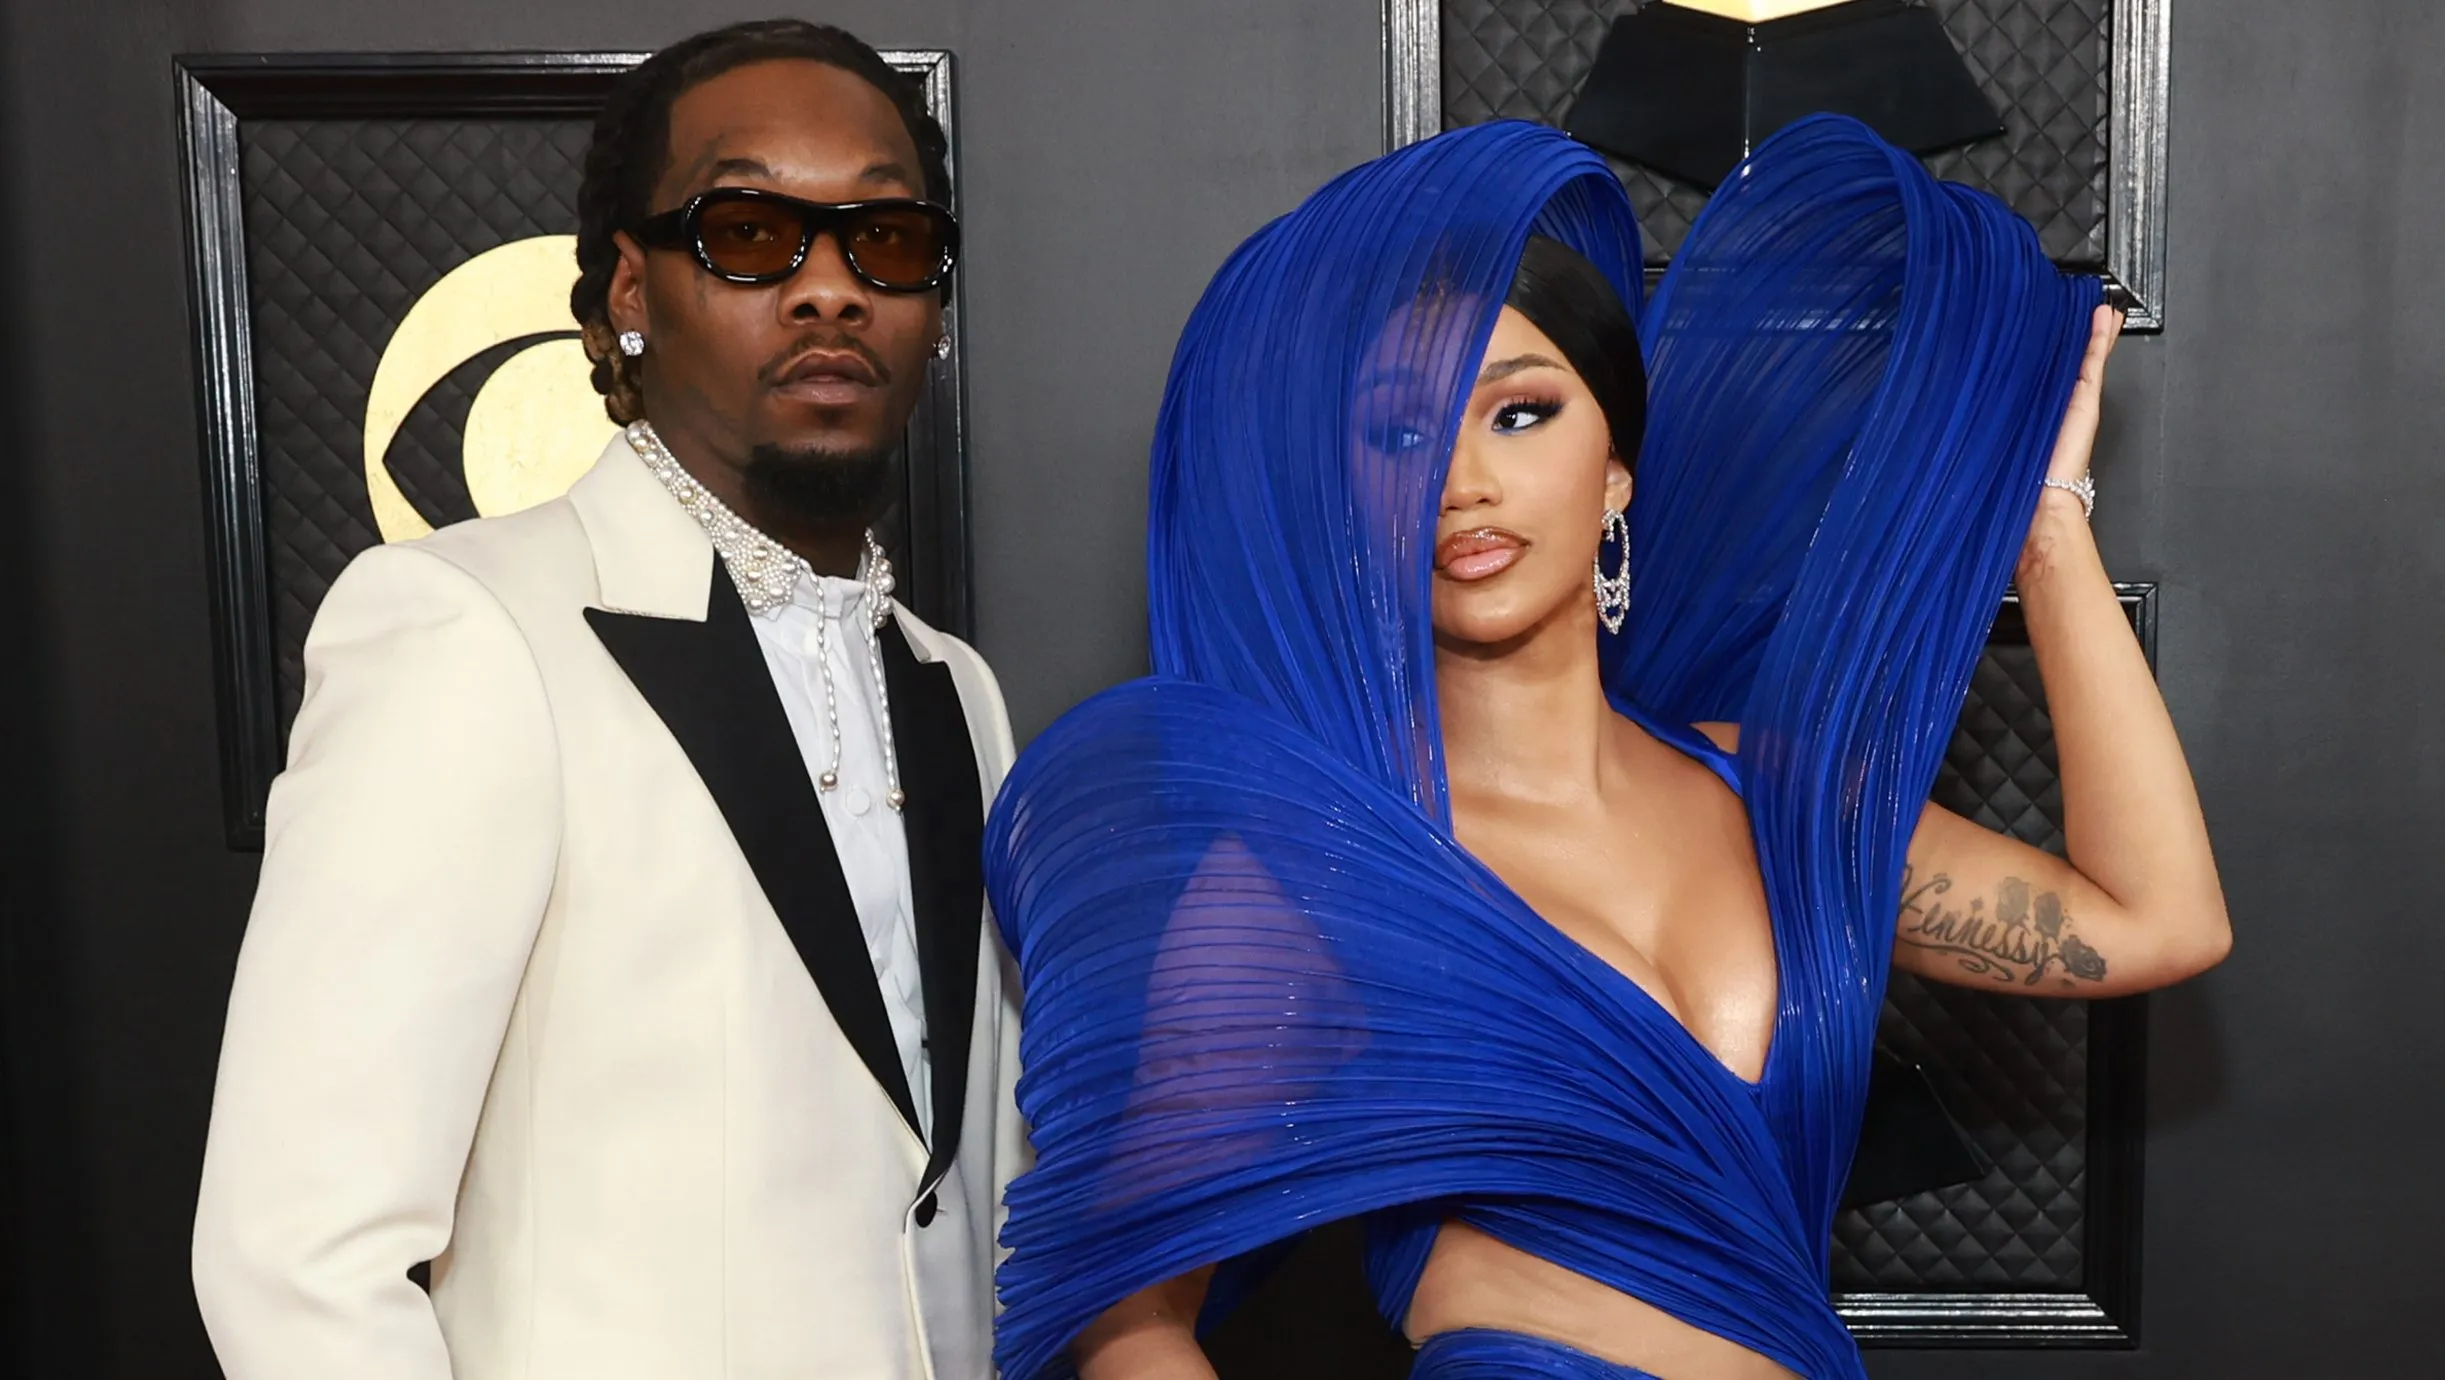 CARDI B & OFFSET ACCUSED OF TRASHING VACATION RENTAL & SKIPPING OUT ON PAYMENTS